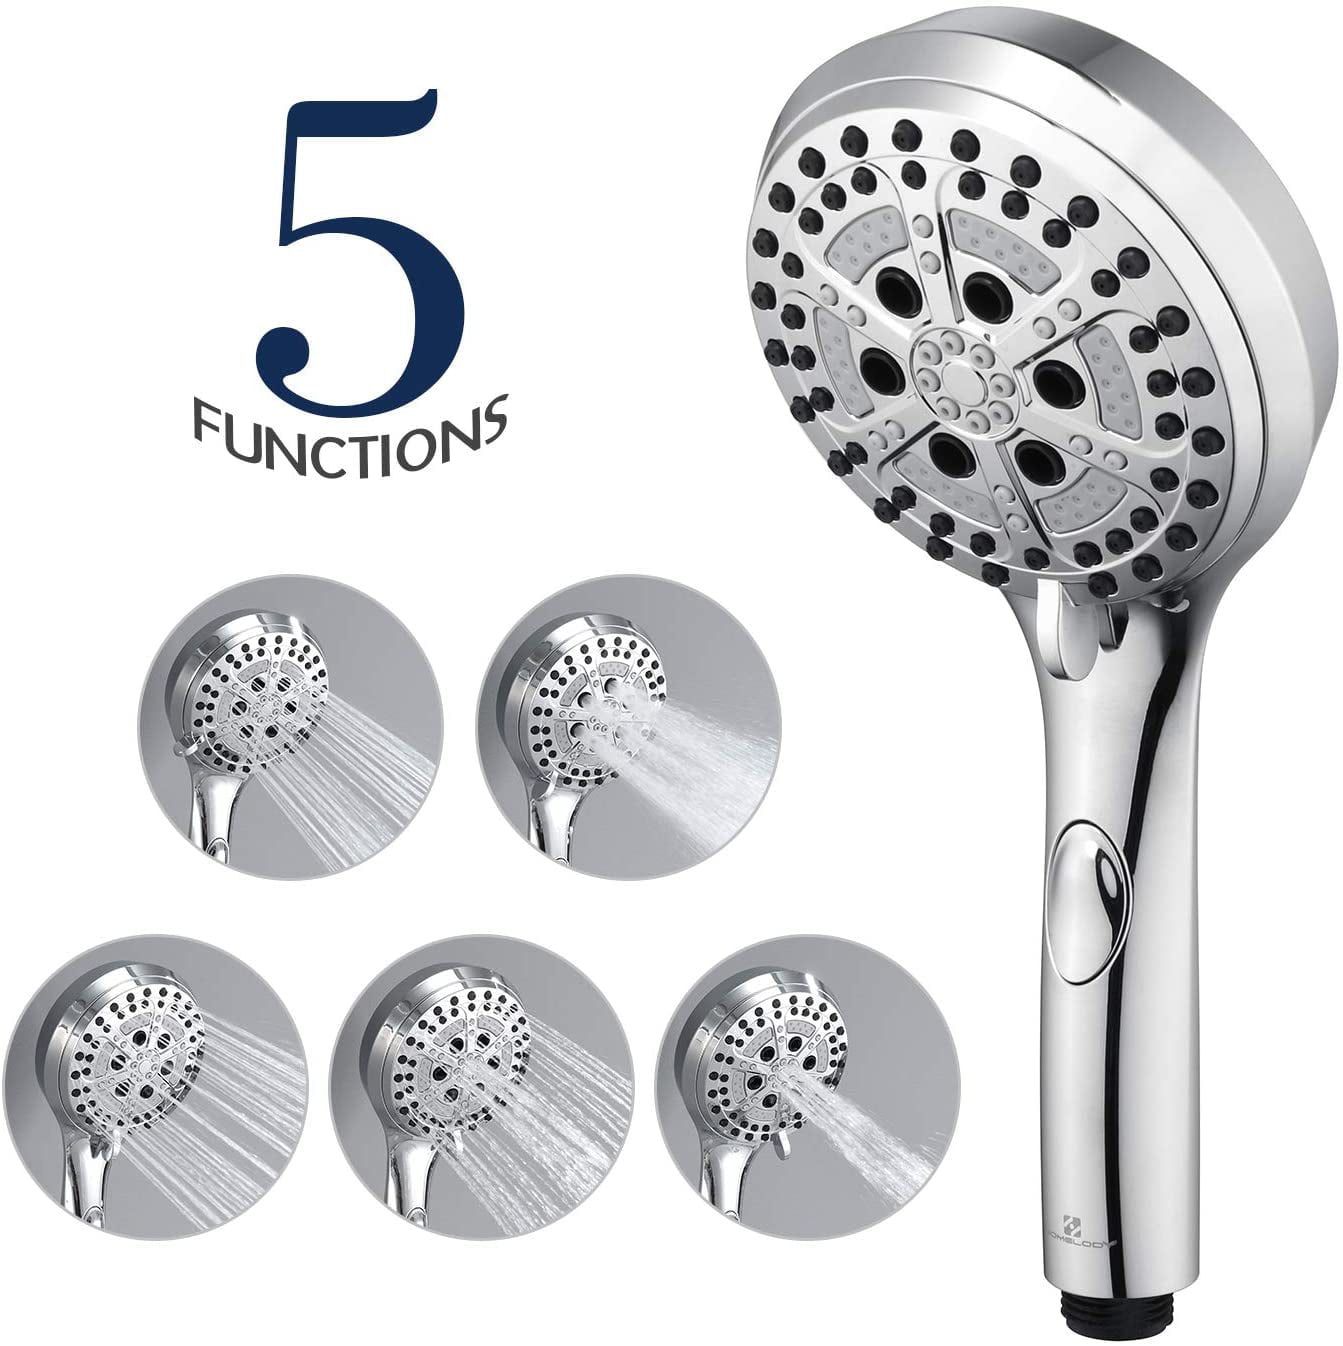 HOMELODY High Pressure Handheld Shower Head with ON/OFF Pause Switch 5-settings 